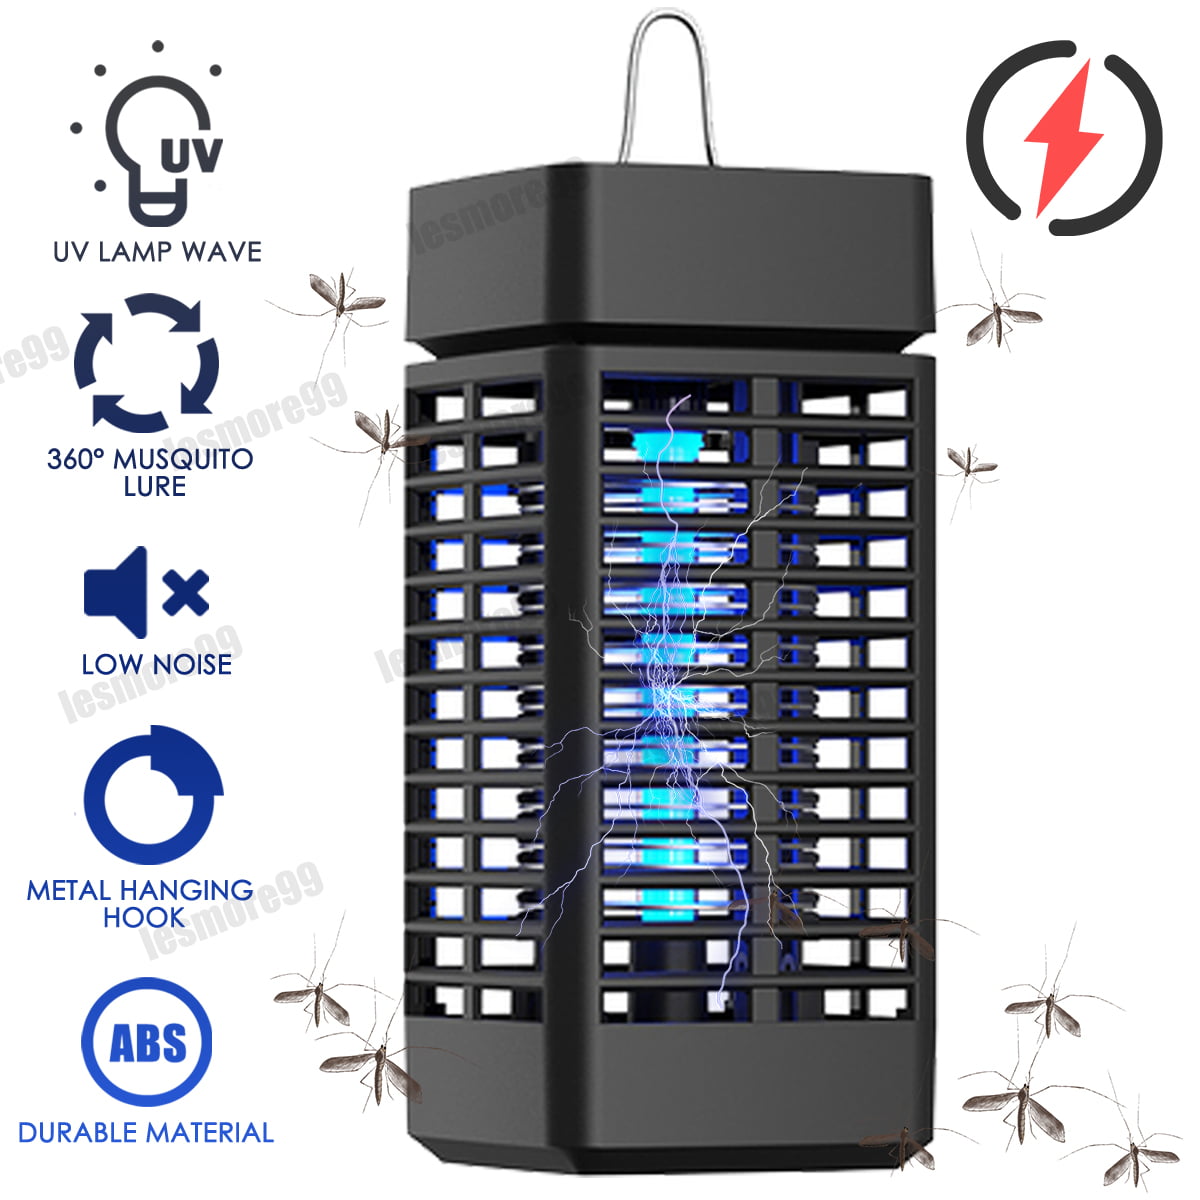 Idomeo LED Mosquito Killer Lamp Small Night Light for Home Use Bug Zappers